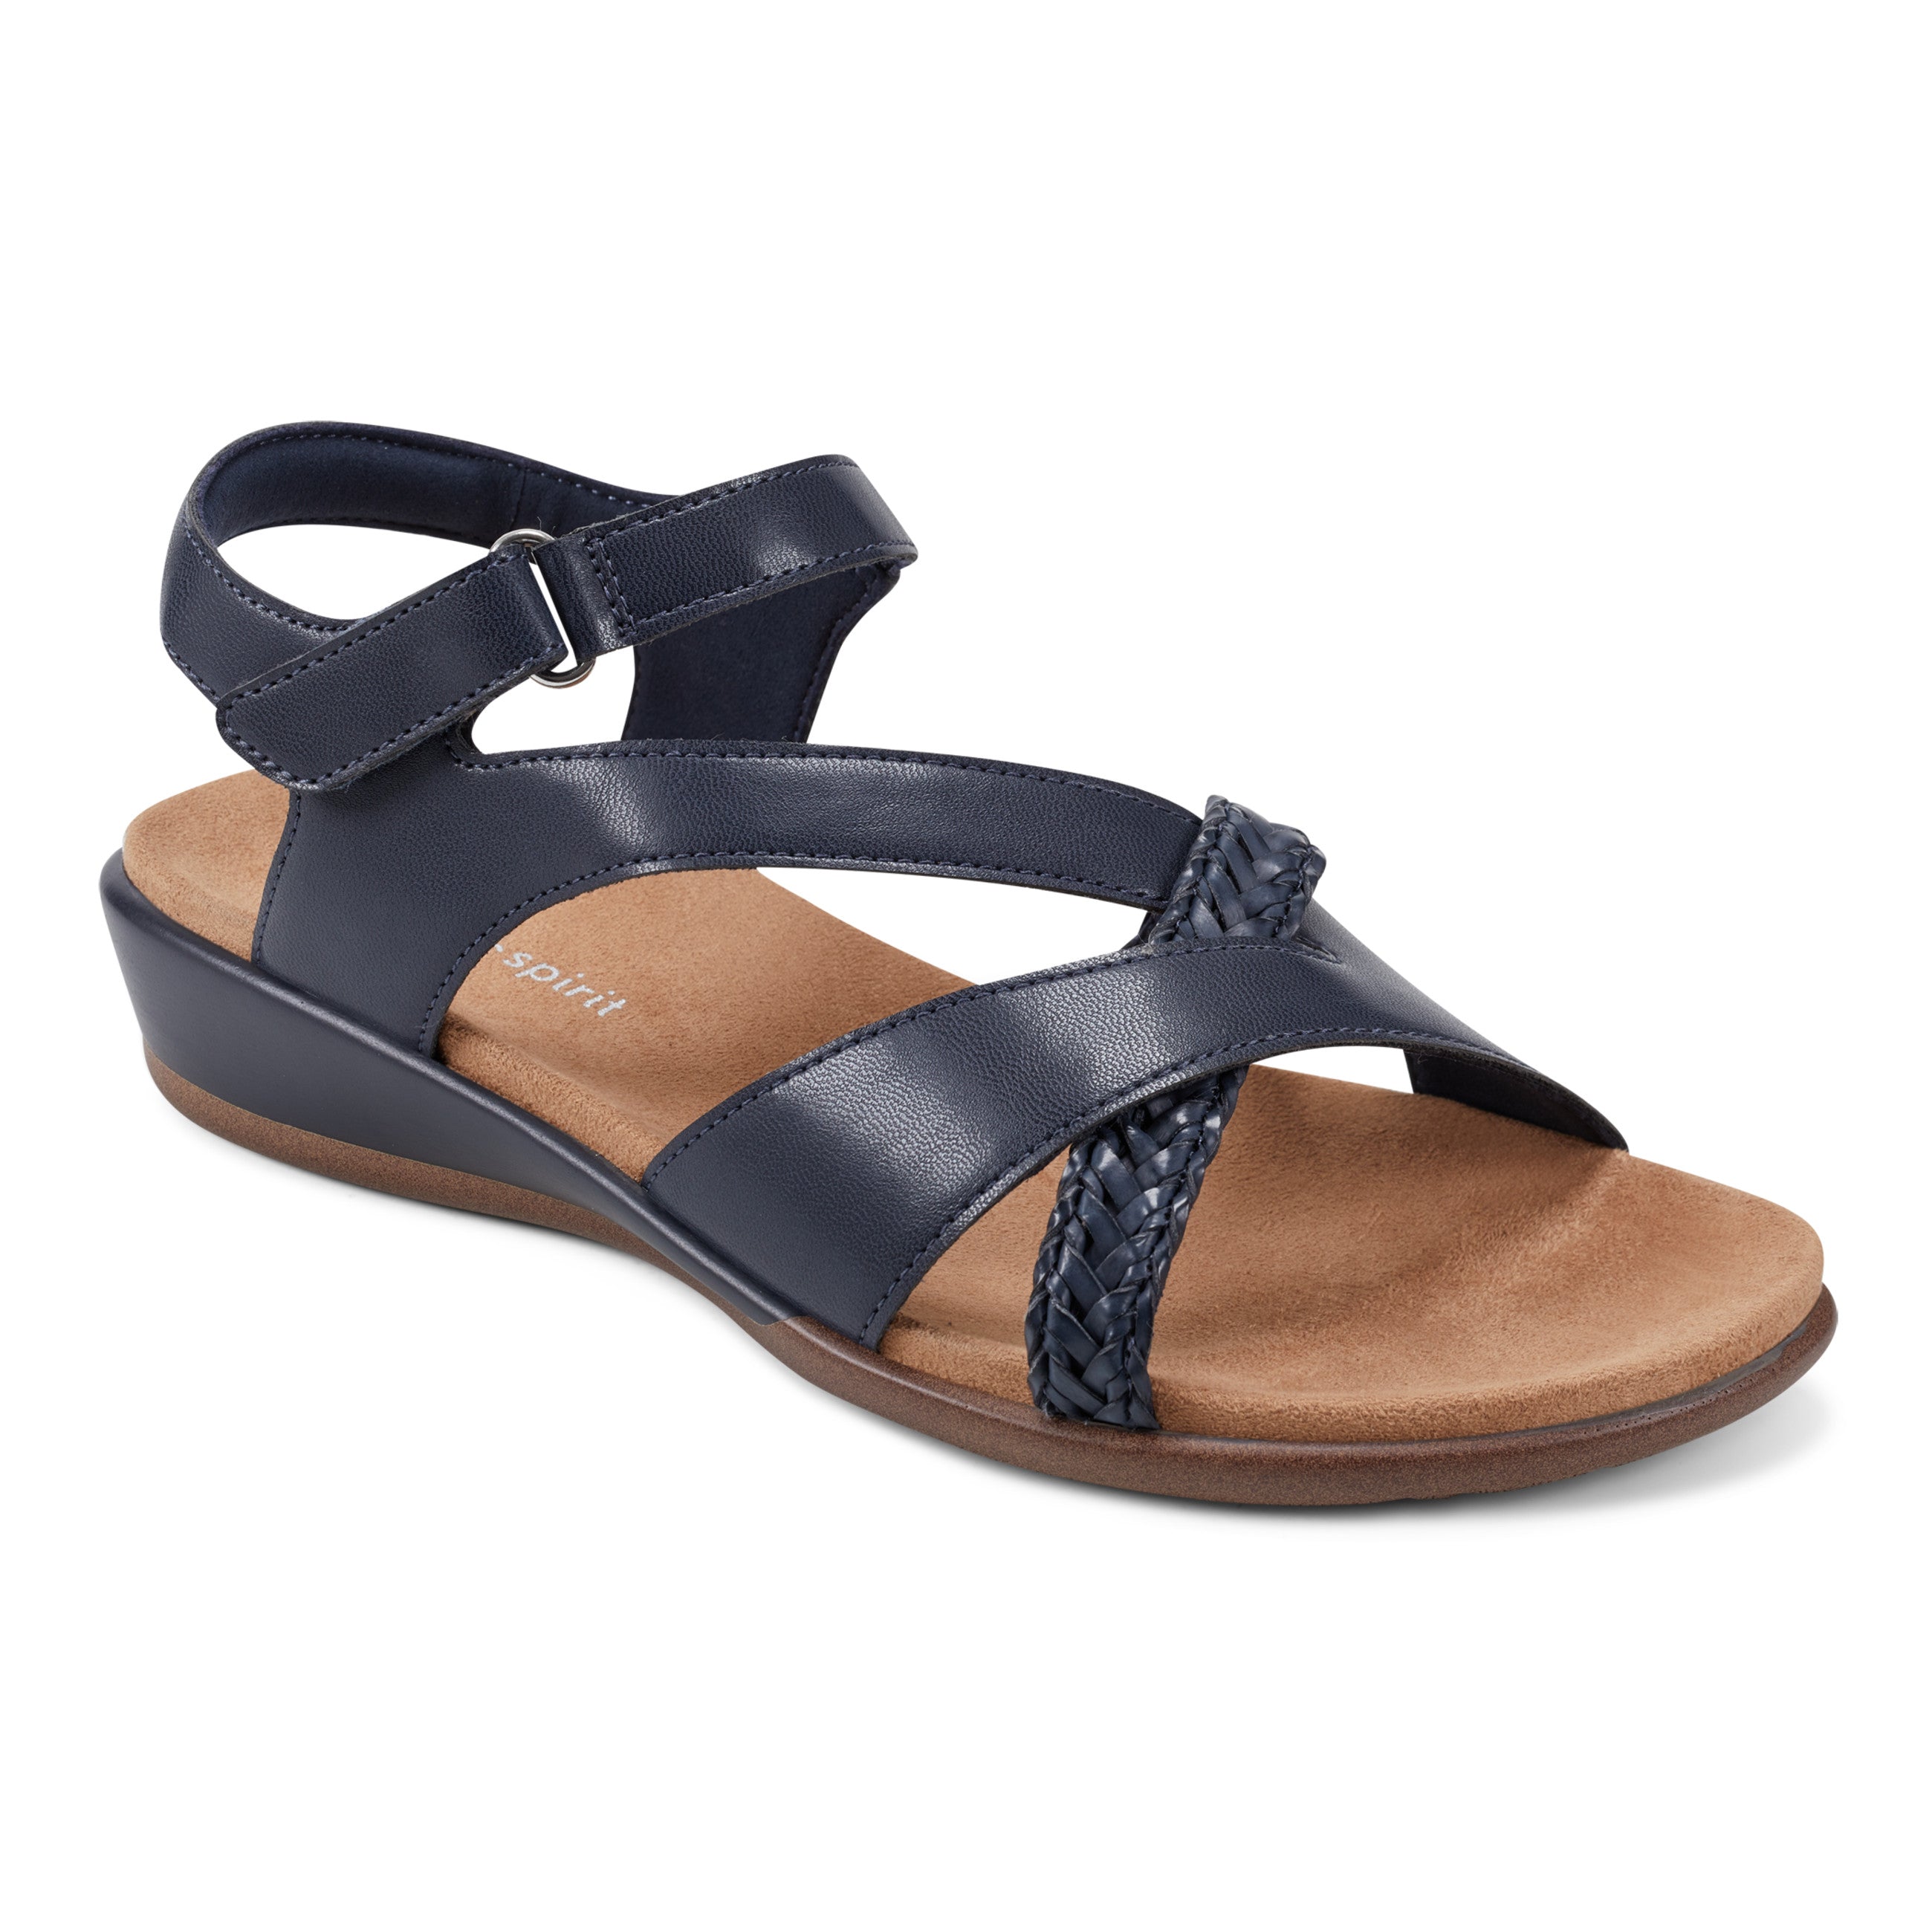 Hart Open Toe Strappy Casual Sandals